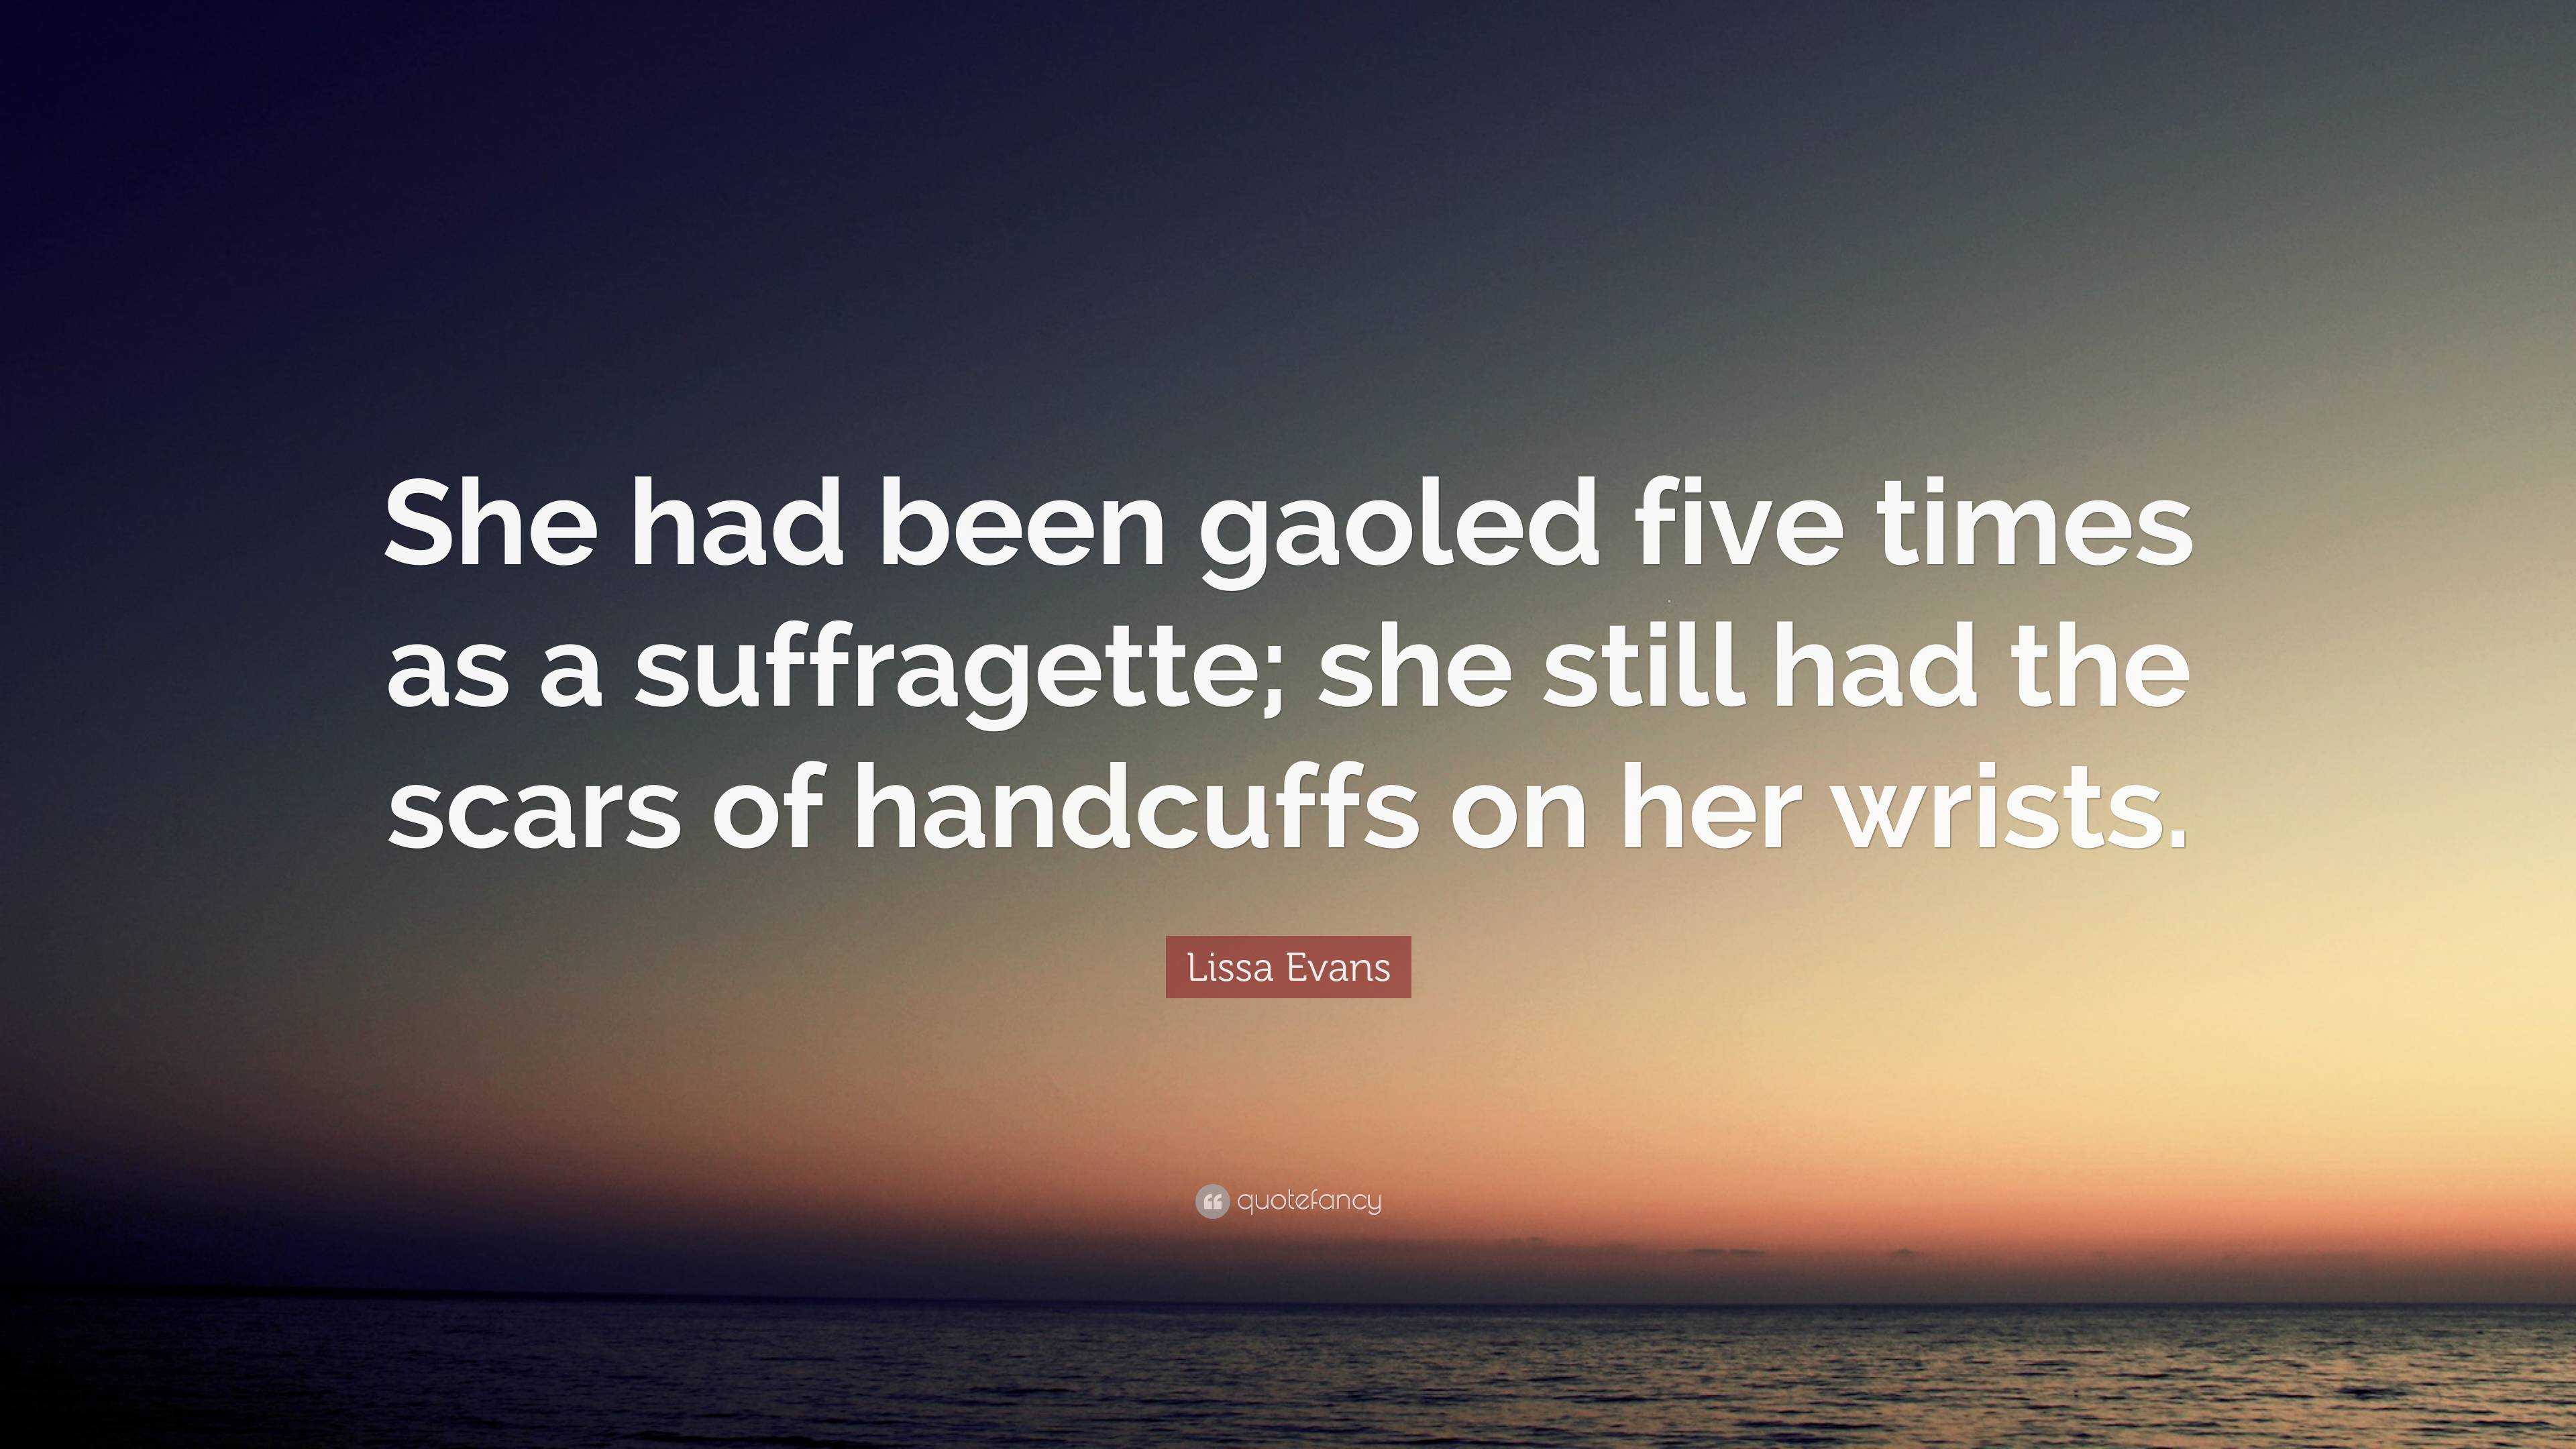 Lissa Evans Quote: “She had been gaoled five times as a suffragette ...